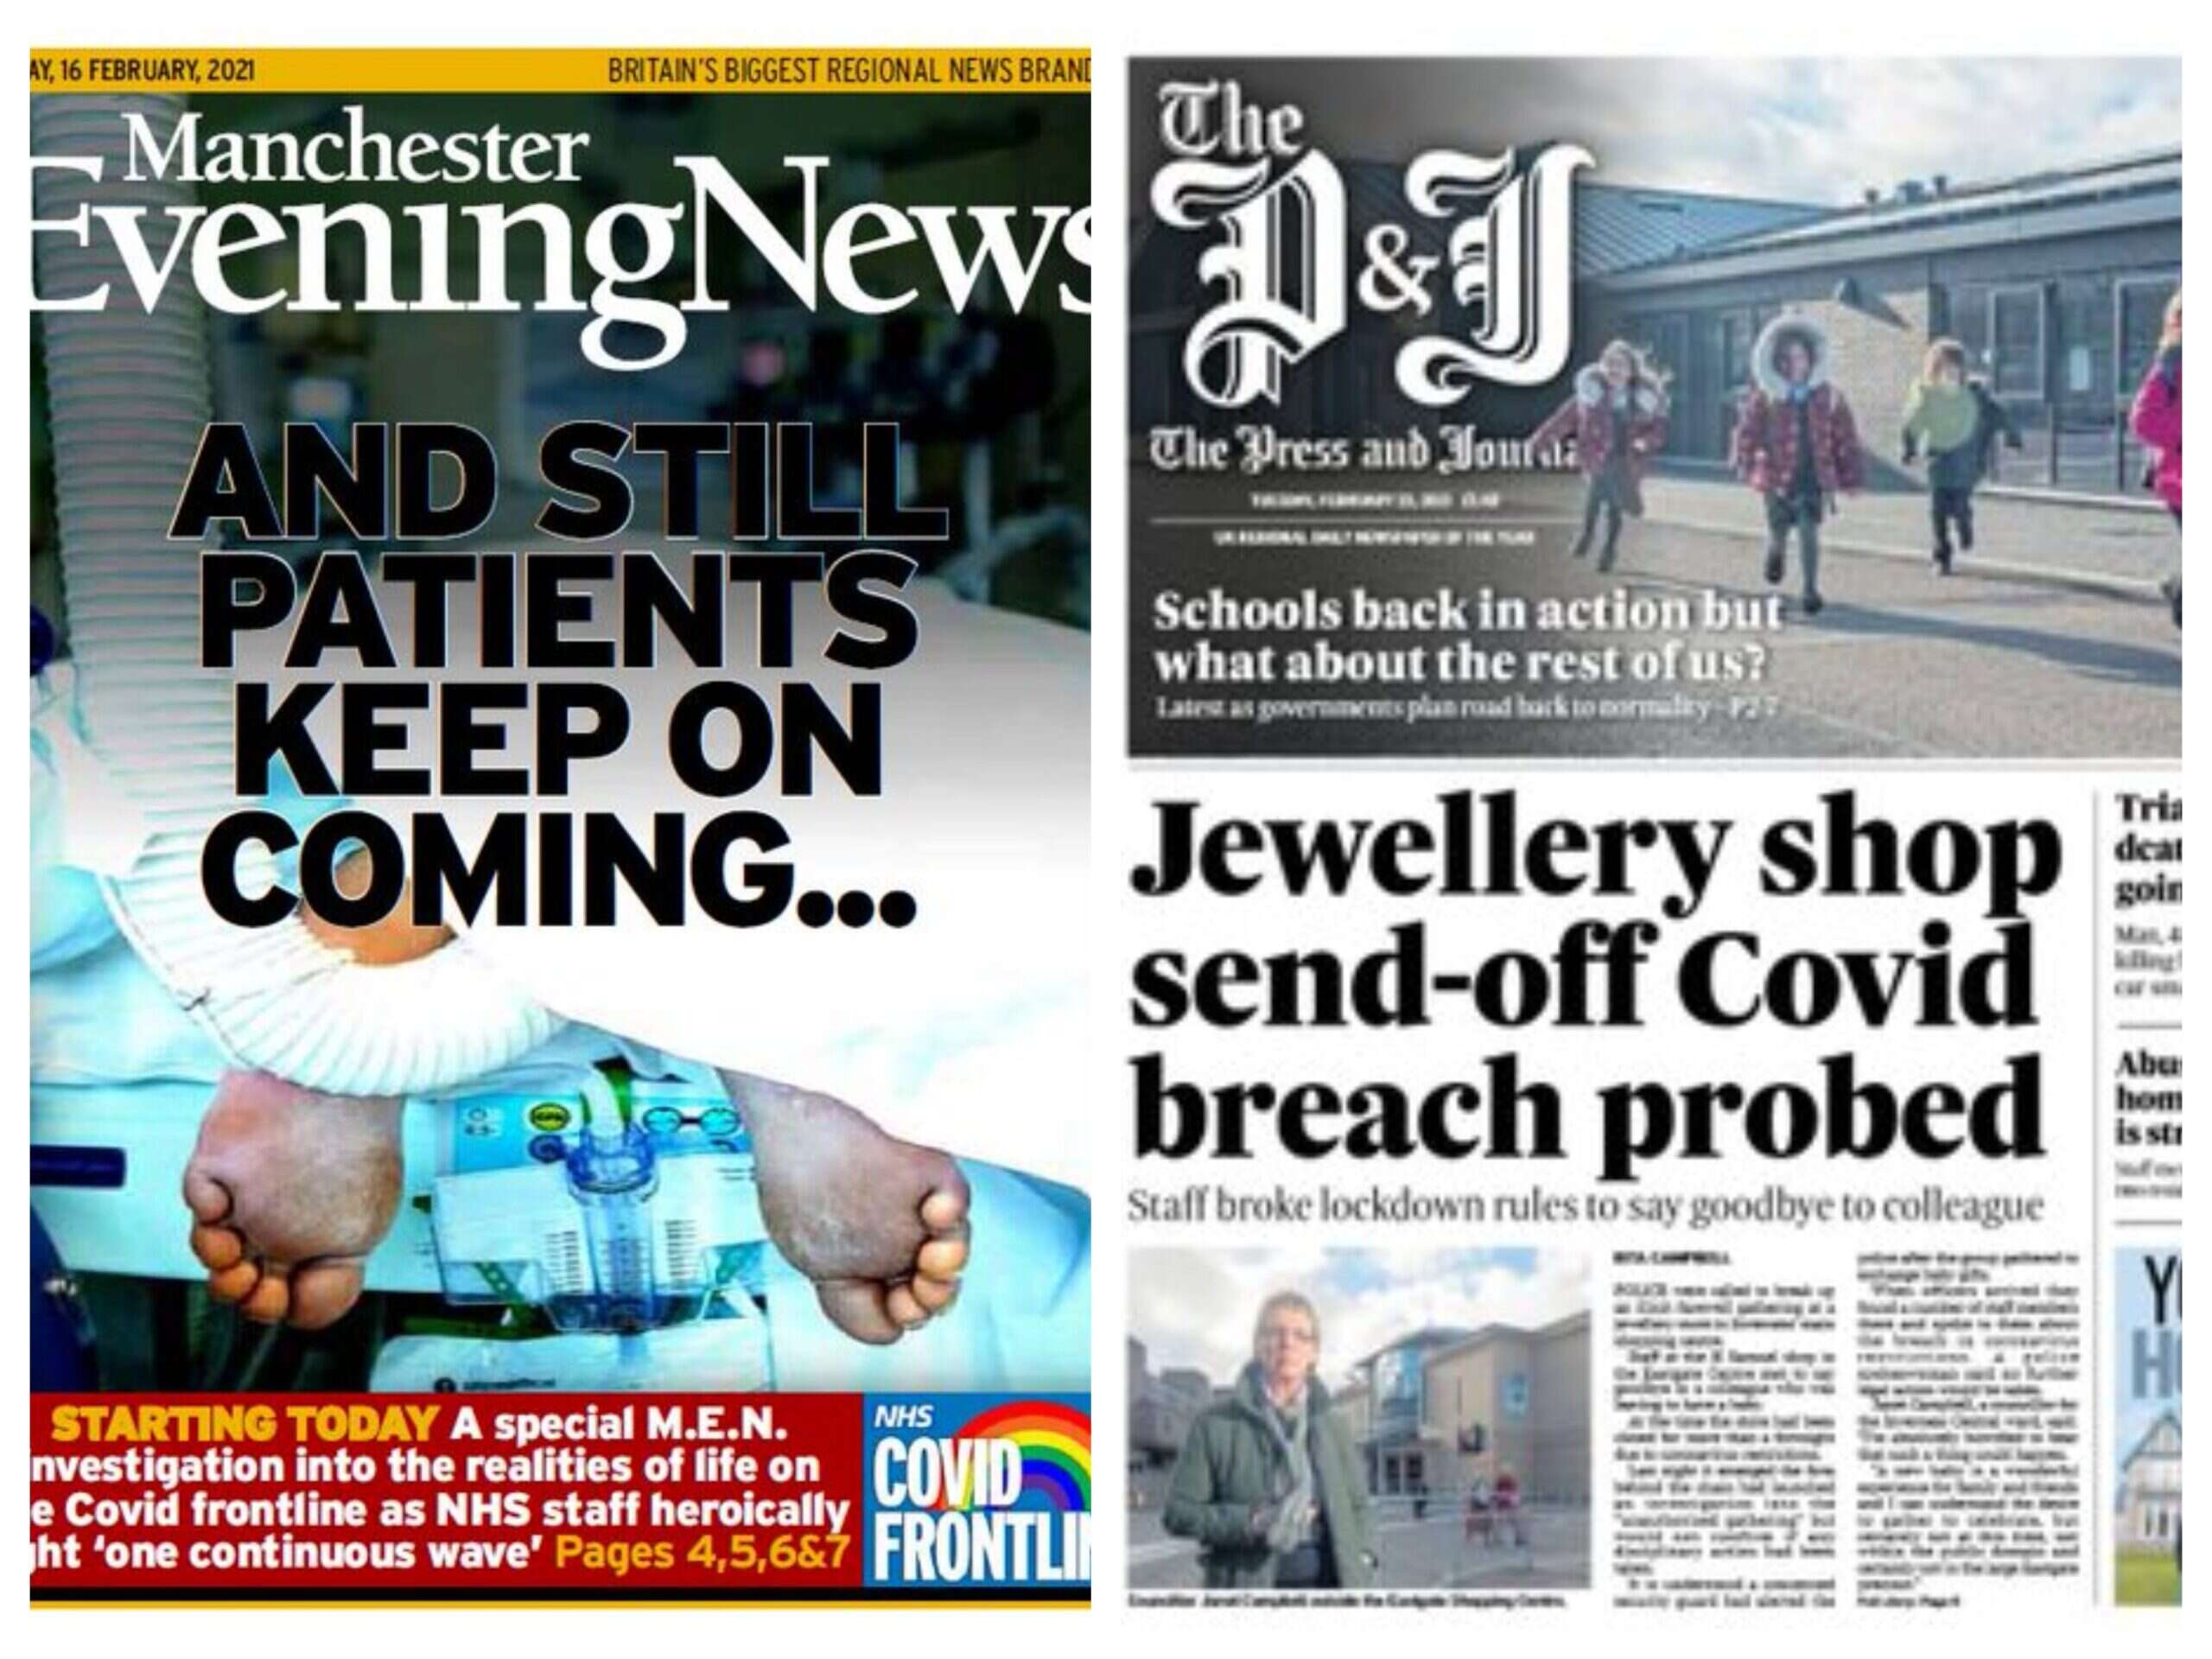 ABCs: UK local newspaper sales hard-hit by pandemic with dailies down by average of 18%